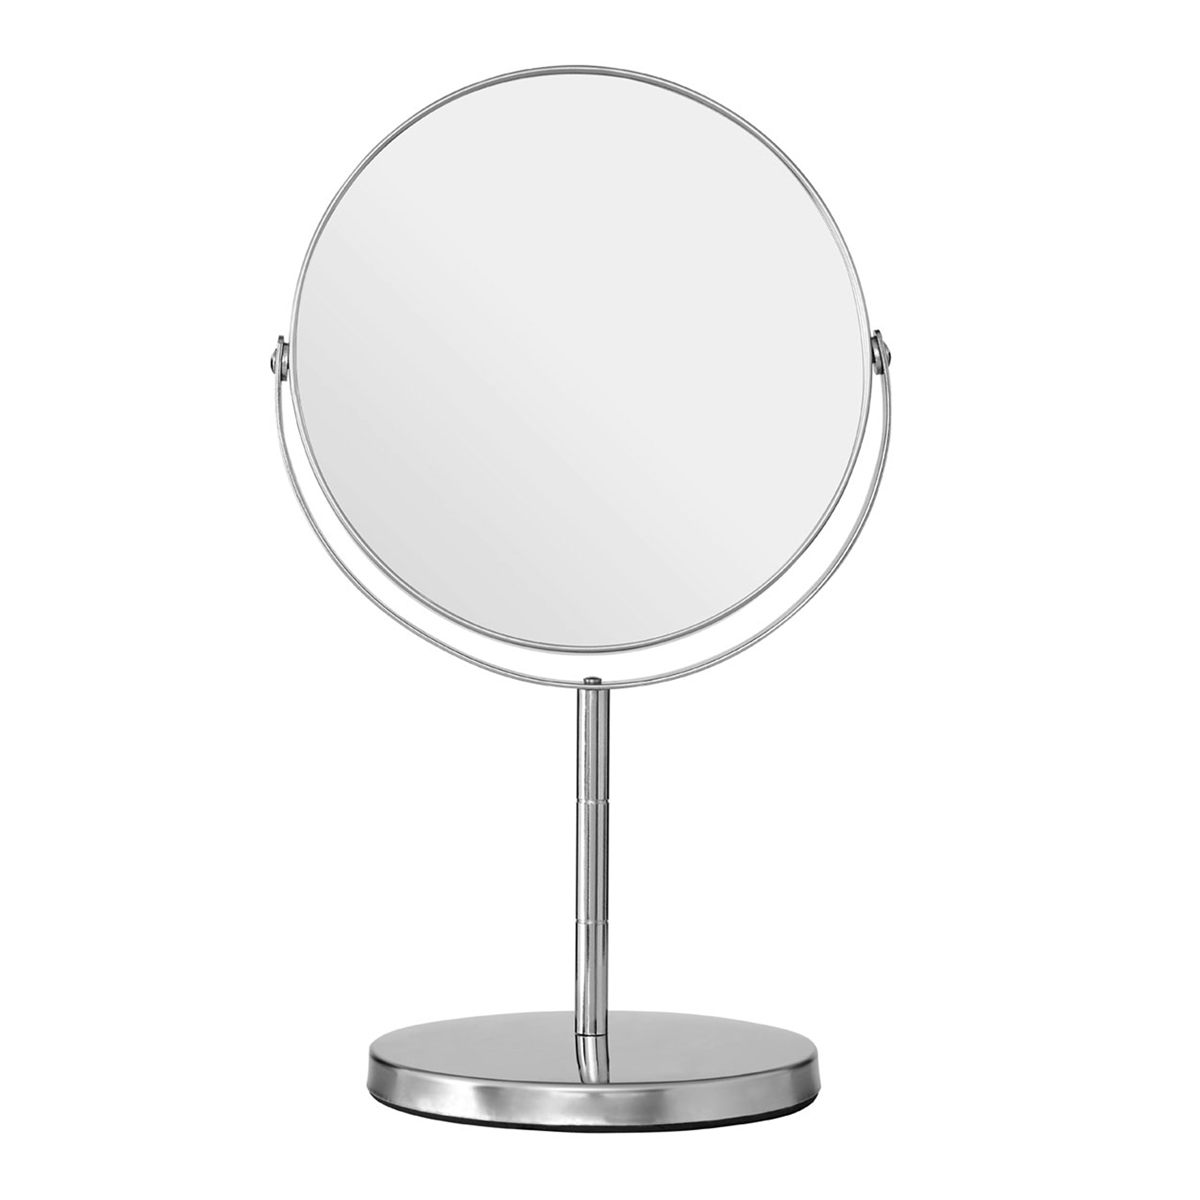 Accents Chrome large freestanding vanity mirror with 2x magnification